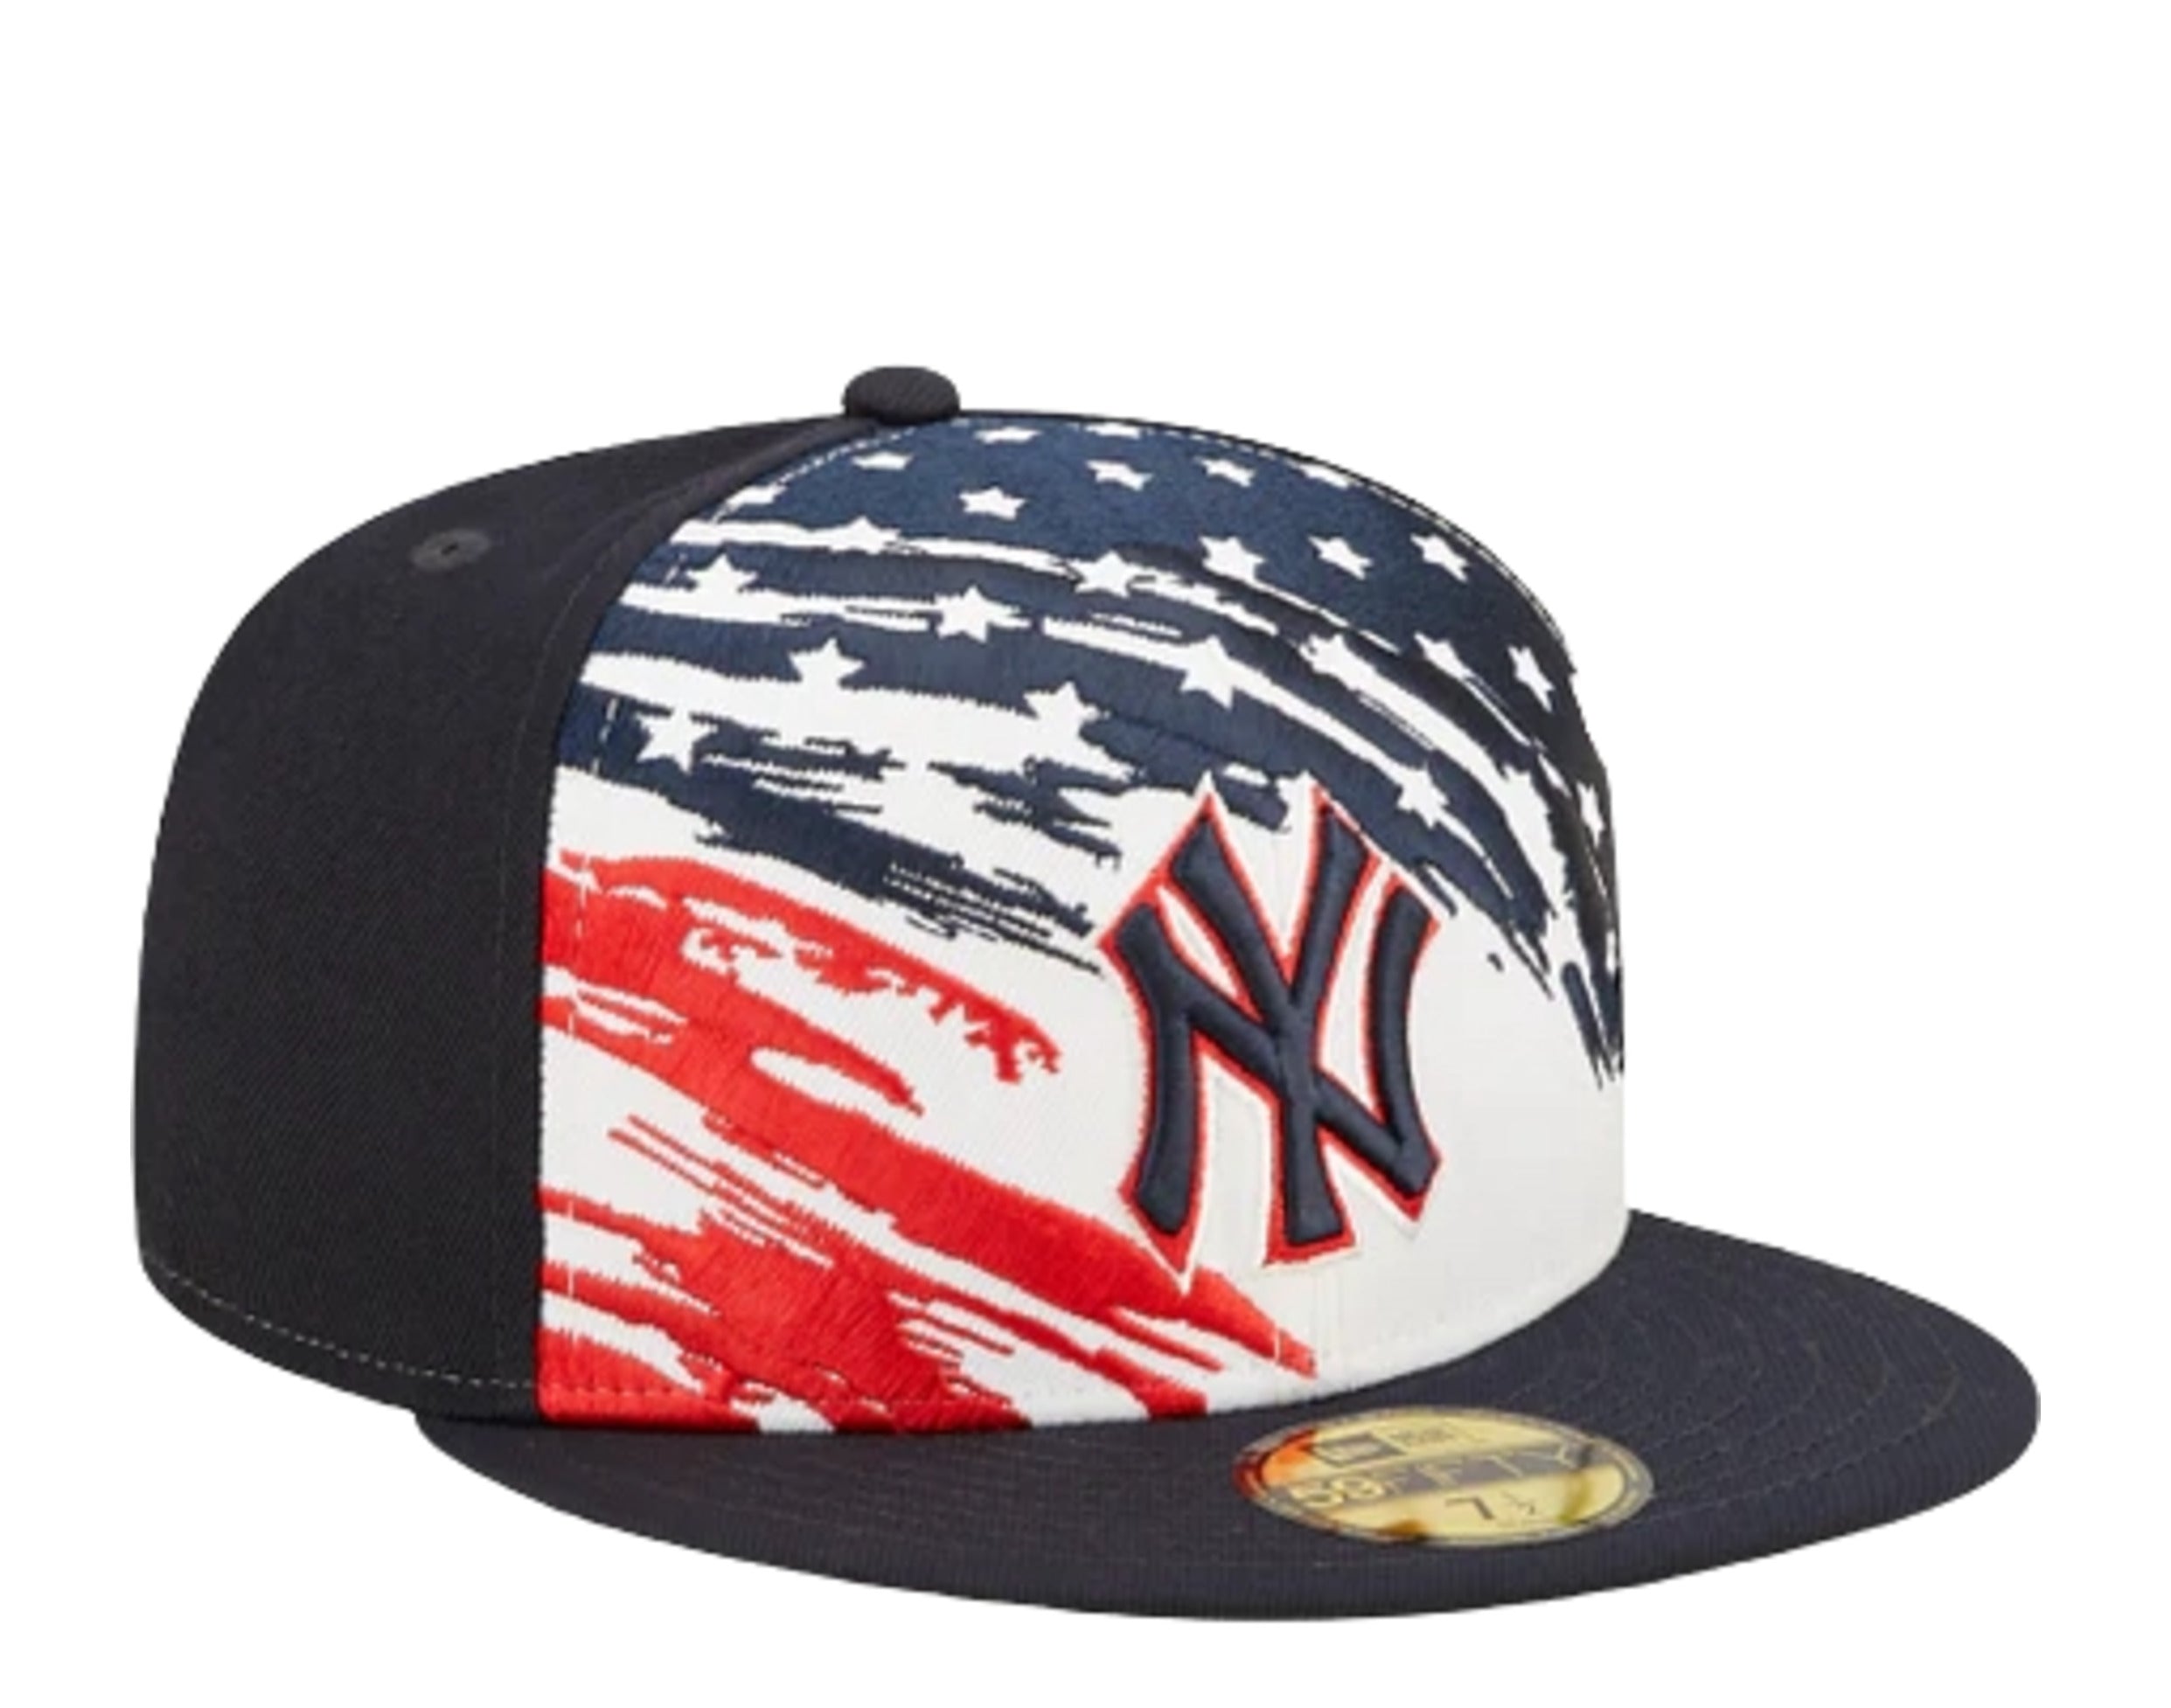 MLB celebrates 4th of July with USA-themed caps